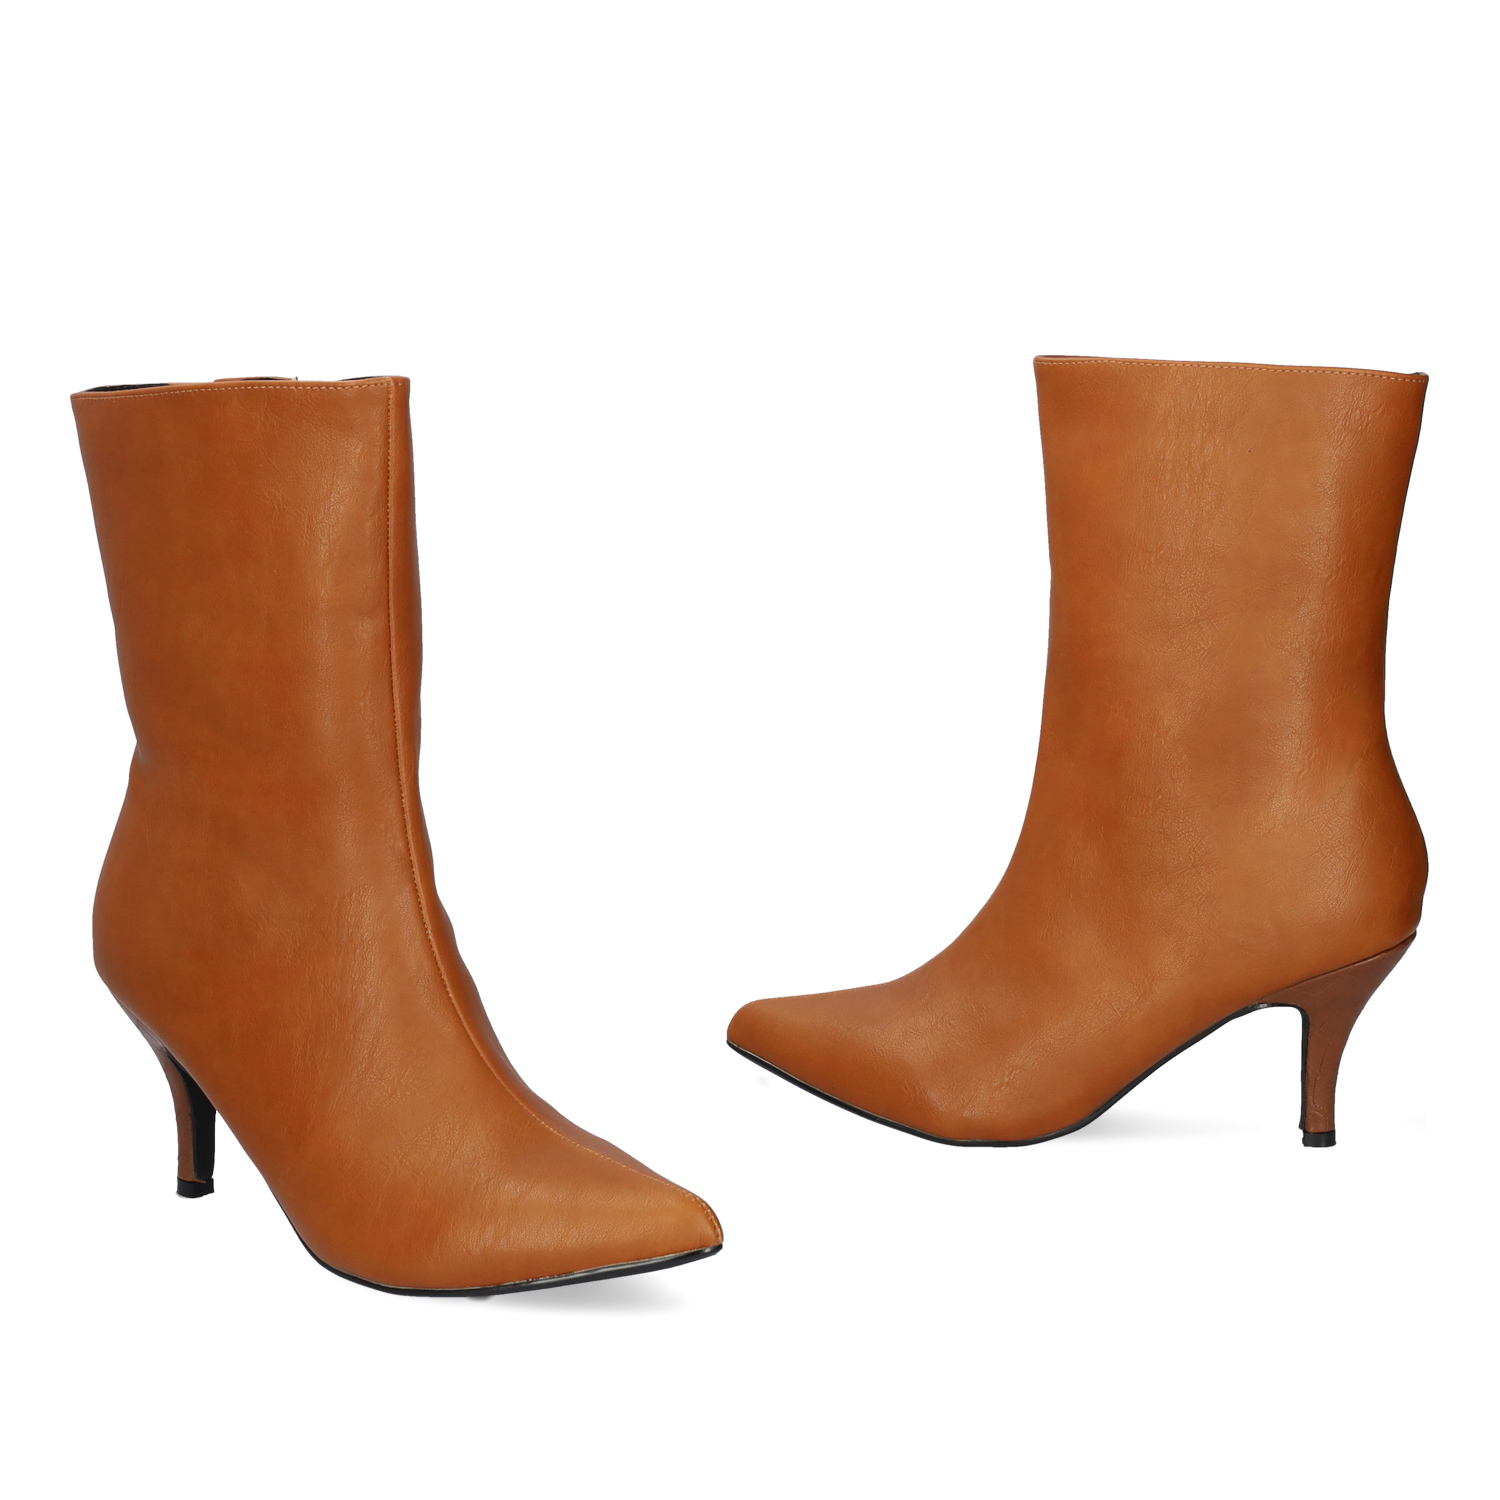 Pointed toed high-top booties in camel colored faux leather 